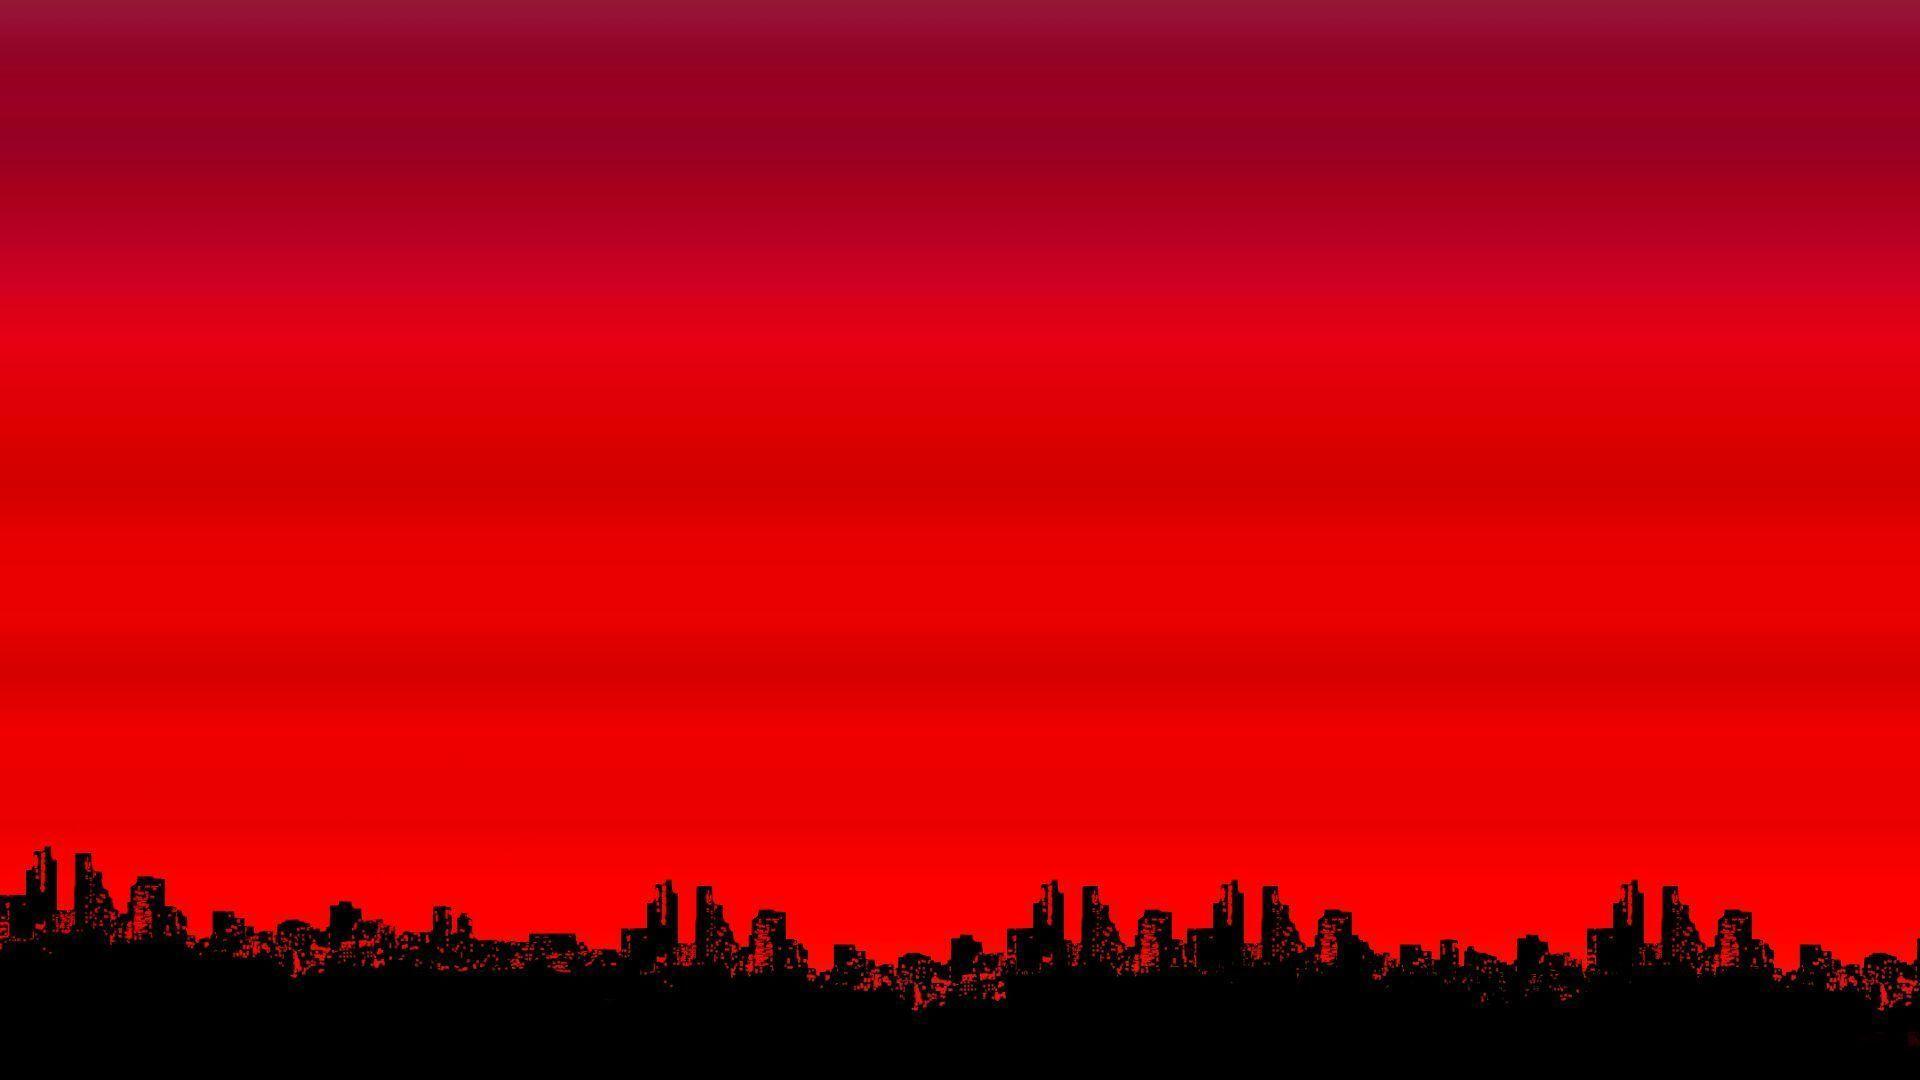 Abstract, Red Wallpaper 2675 1080x1920px Red Wallpaper. Red